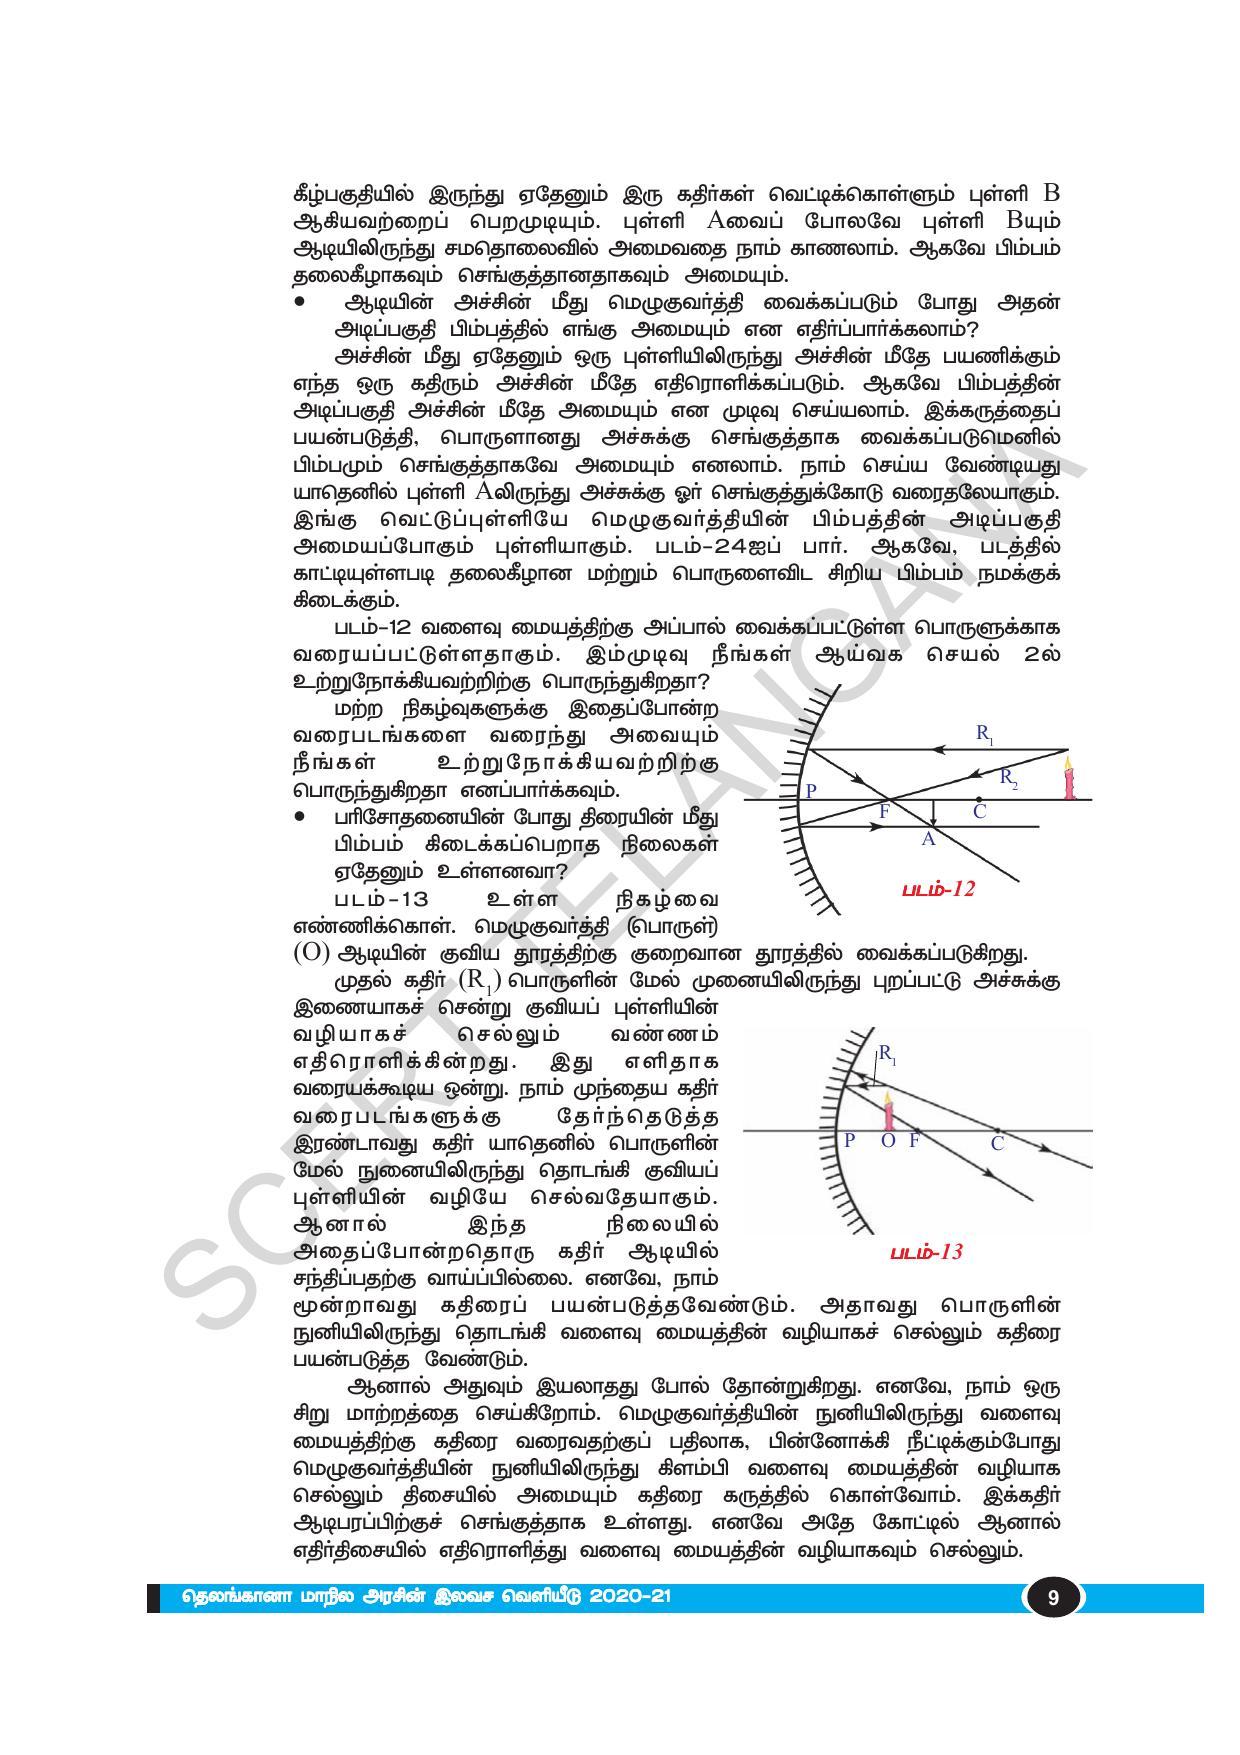 TS SCERT Class 10 Physical Science(Tamil Medium) Text Book - Page 21